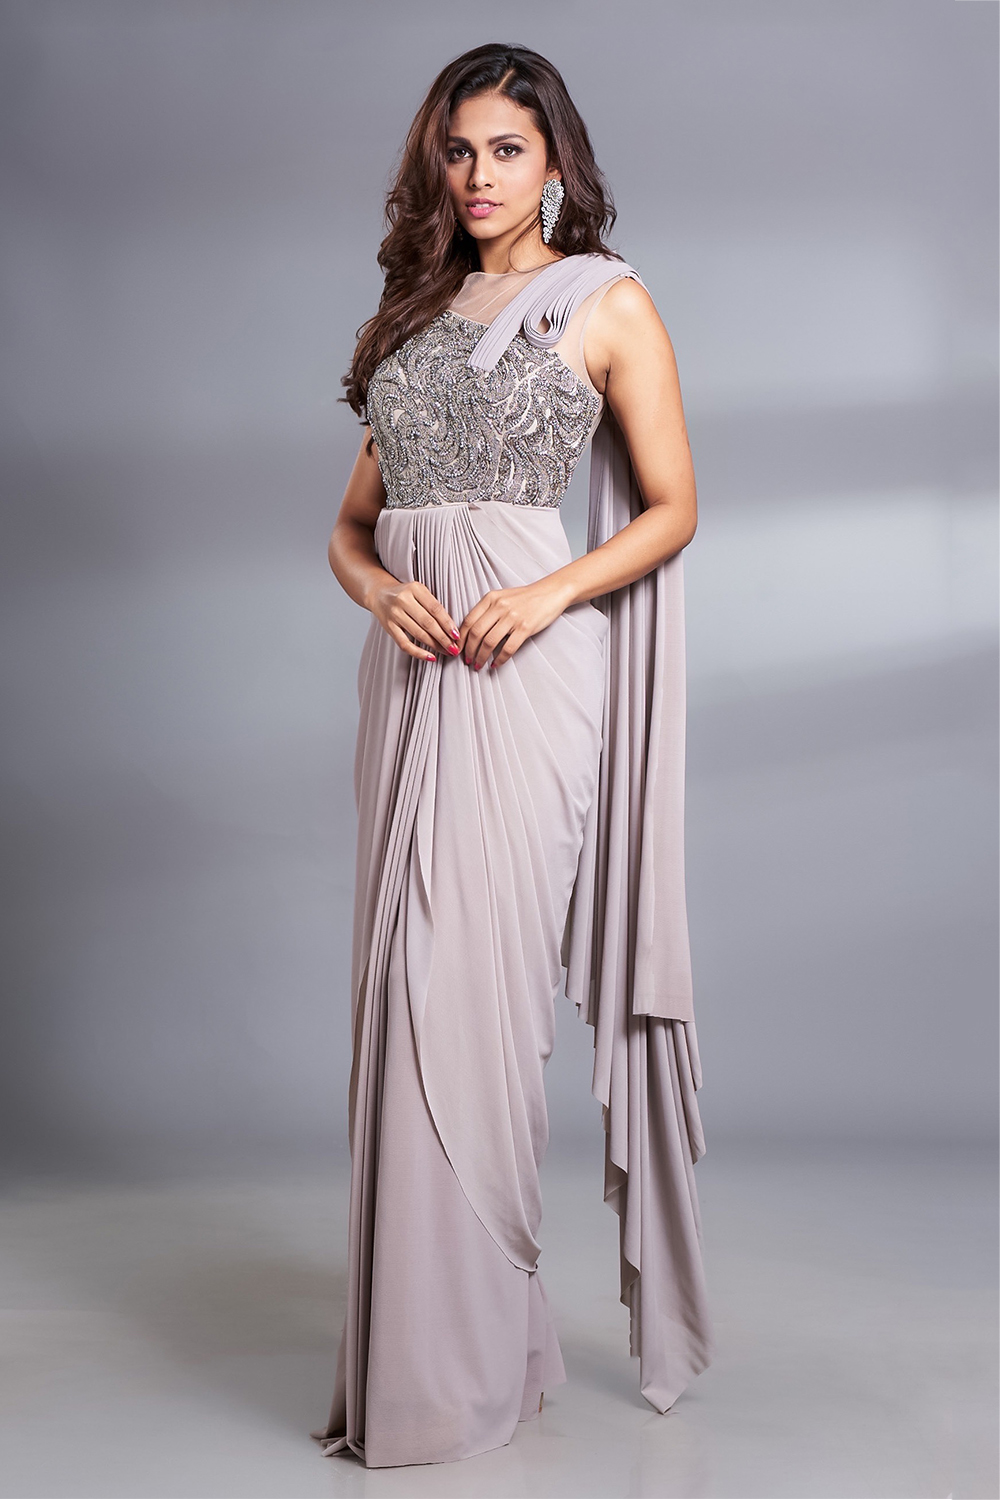 STONE GREY DRAPED SAREE GOWN WITH A HAND EMBROIDERED METALLIC WORK BODICE  AND A 3D DETAILED ATTACHED PALLU  Seasons India